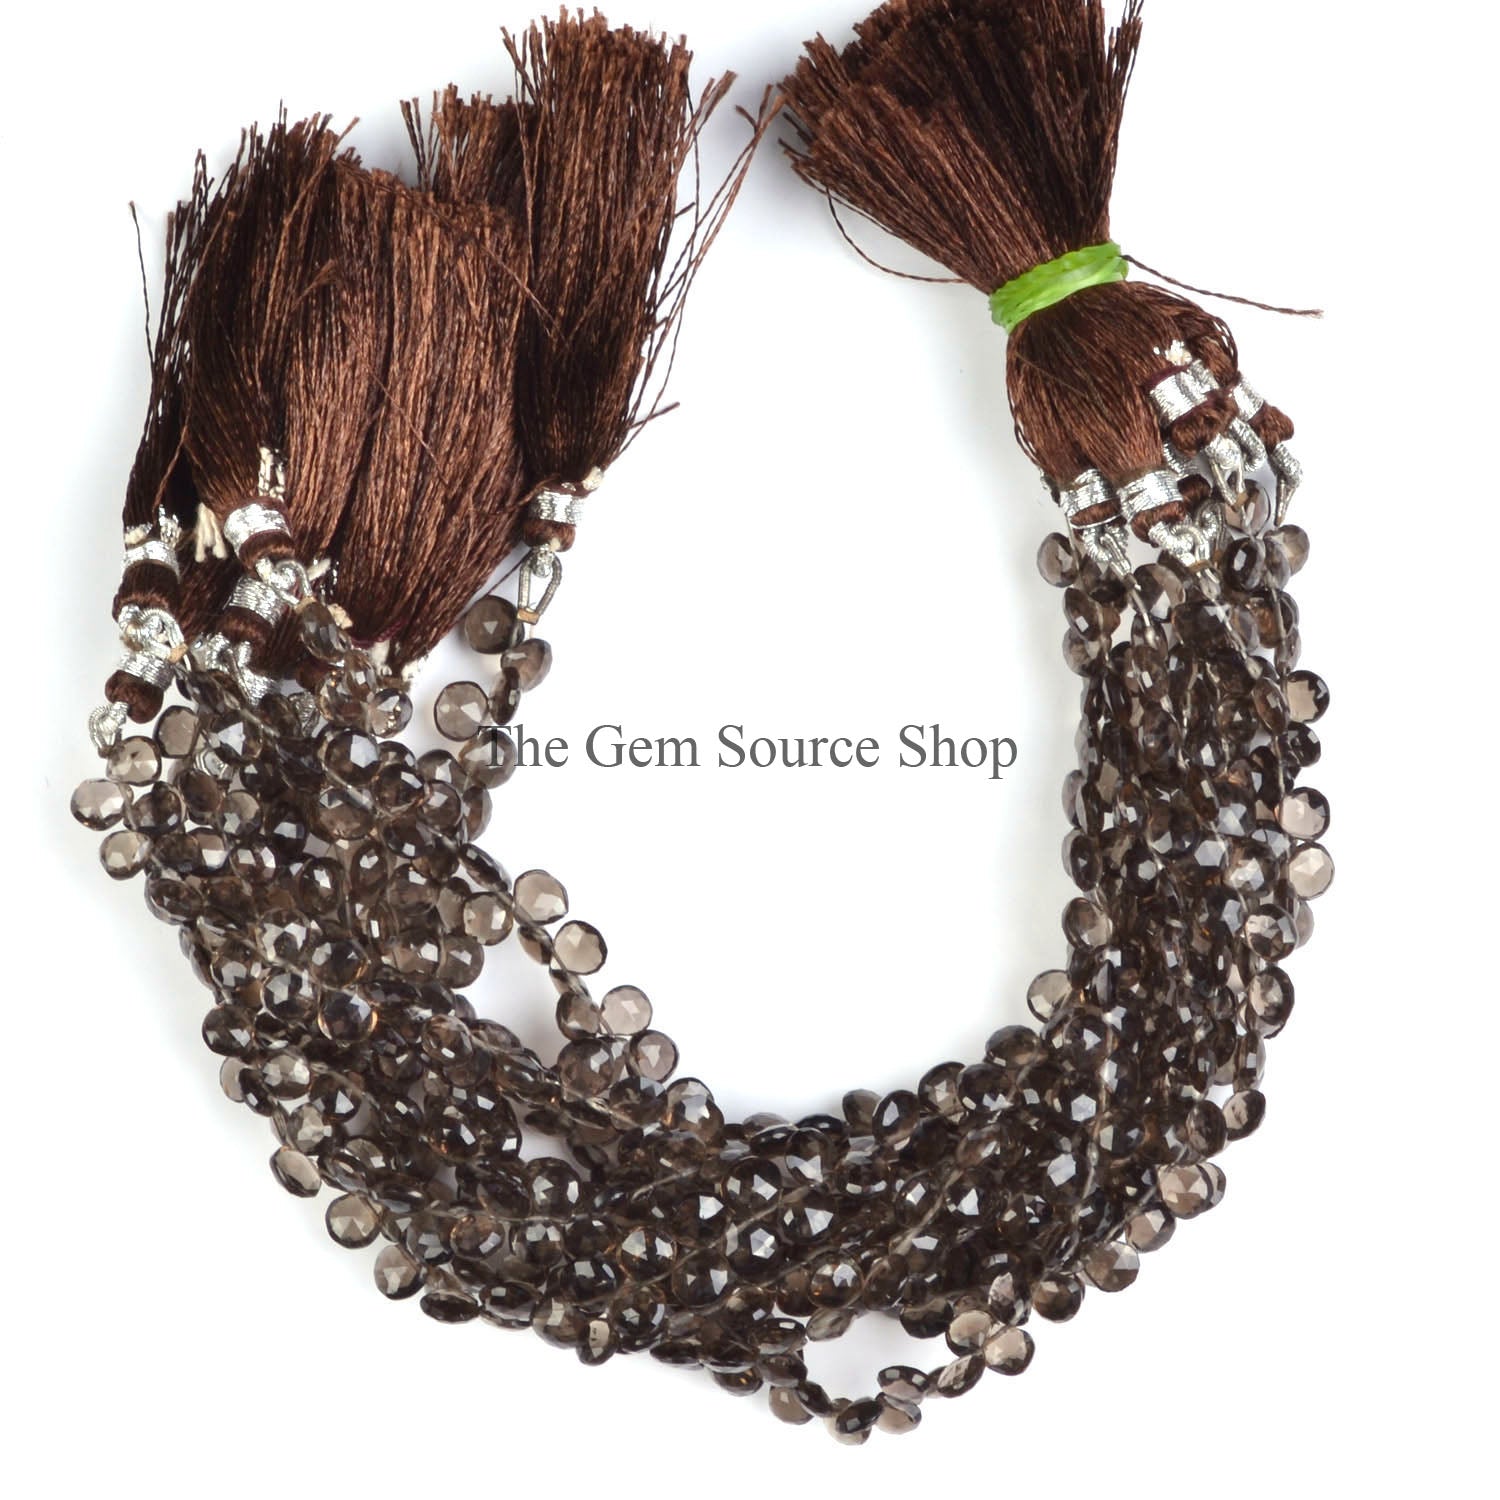 Smoky Quartz Beads, Faceted Heart Beads, Side Drill Heart Beads, Smoky Quartz Gemstone